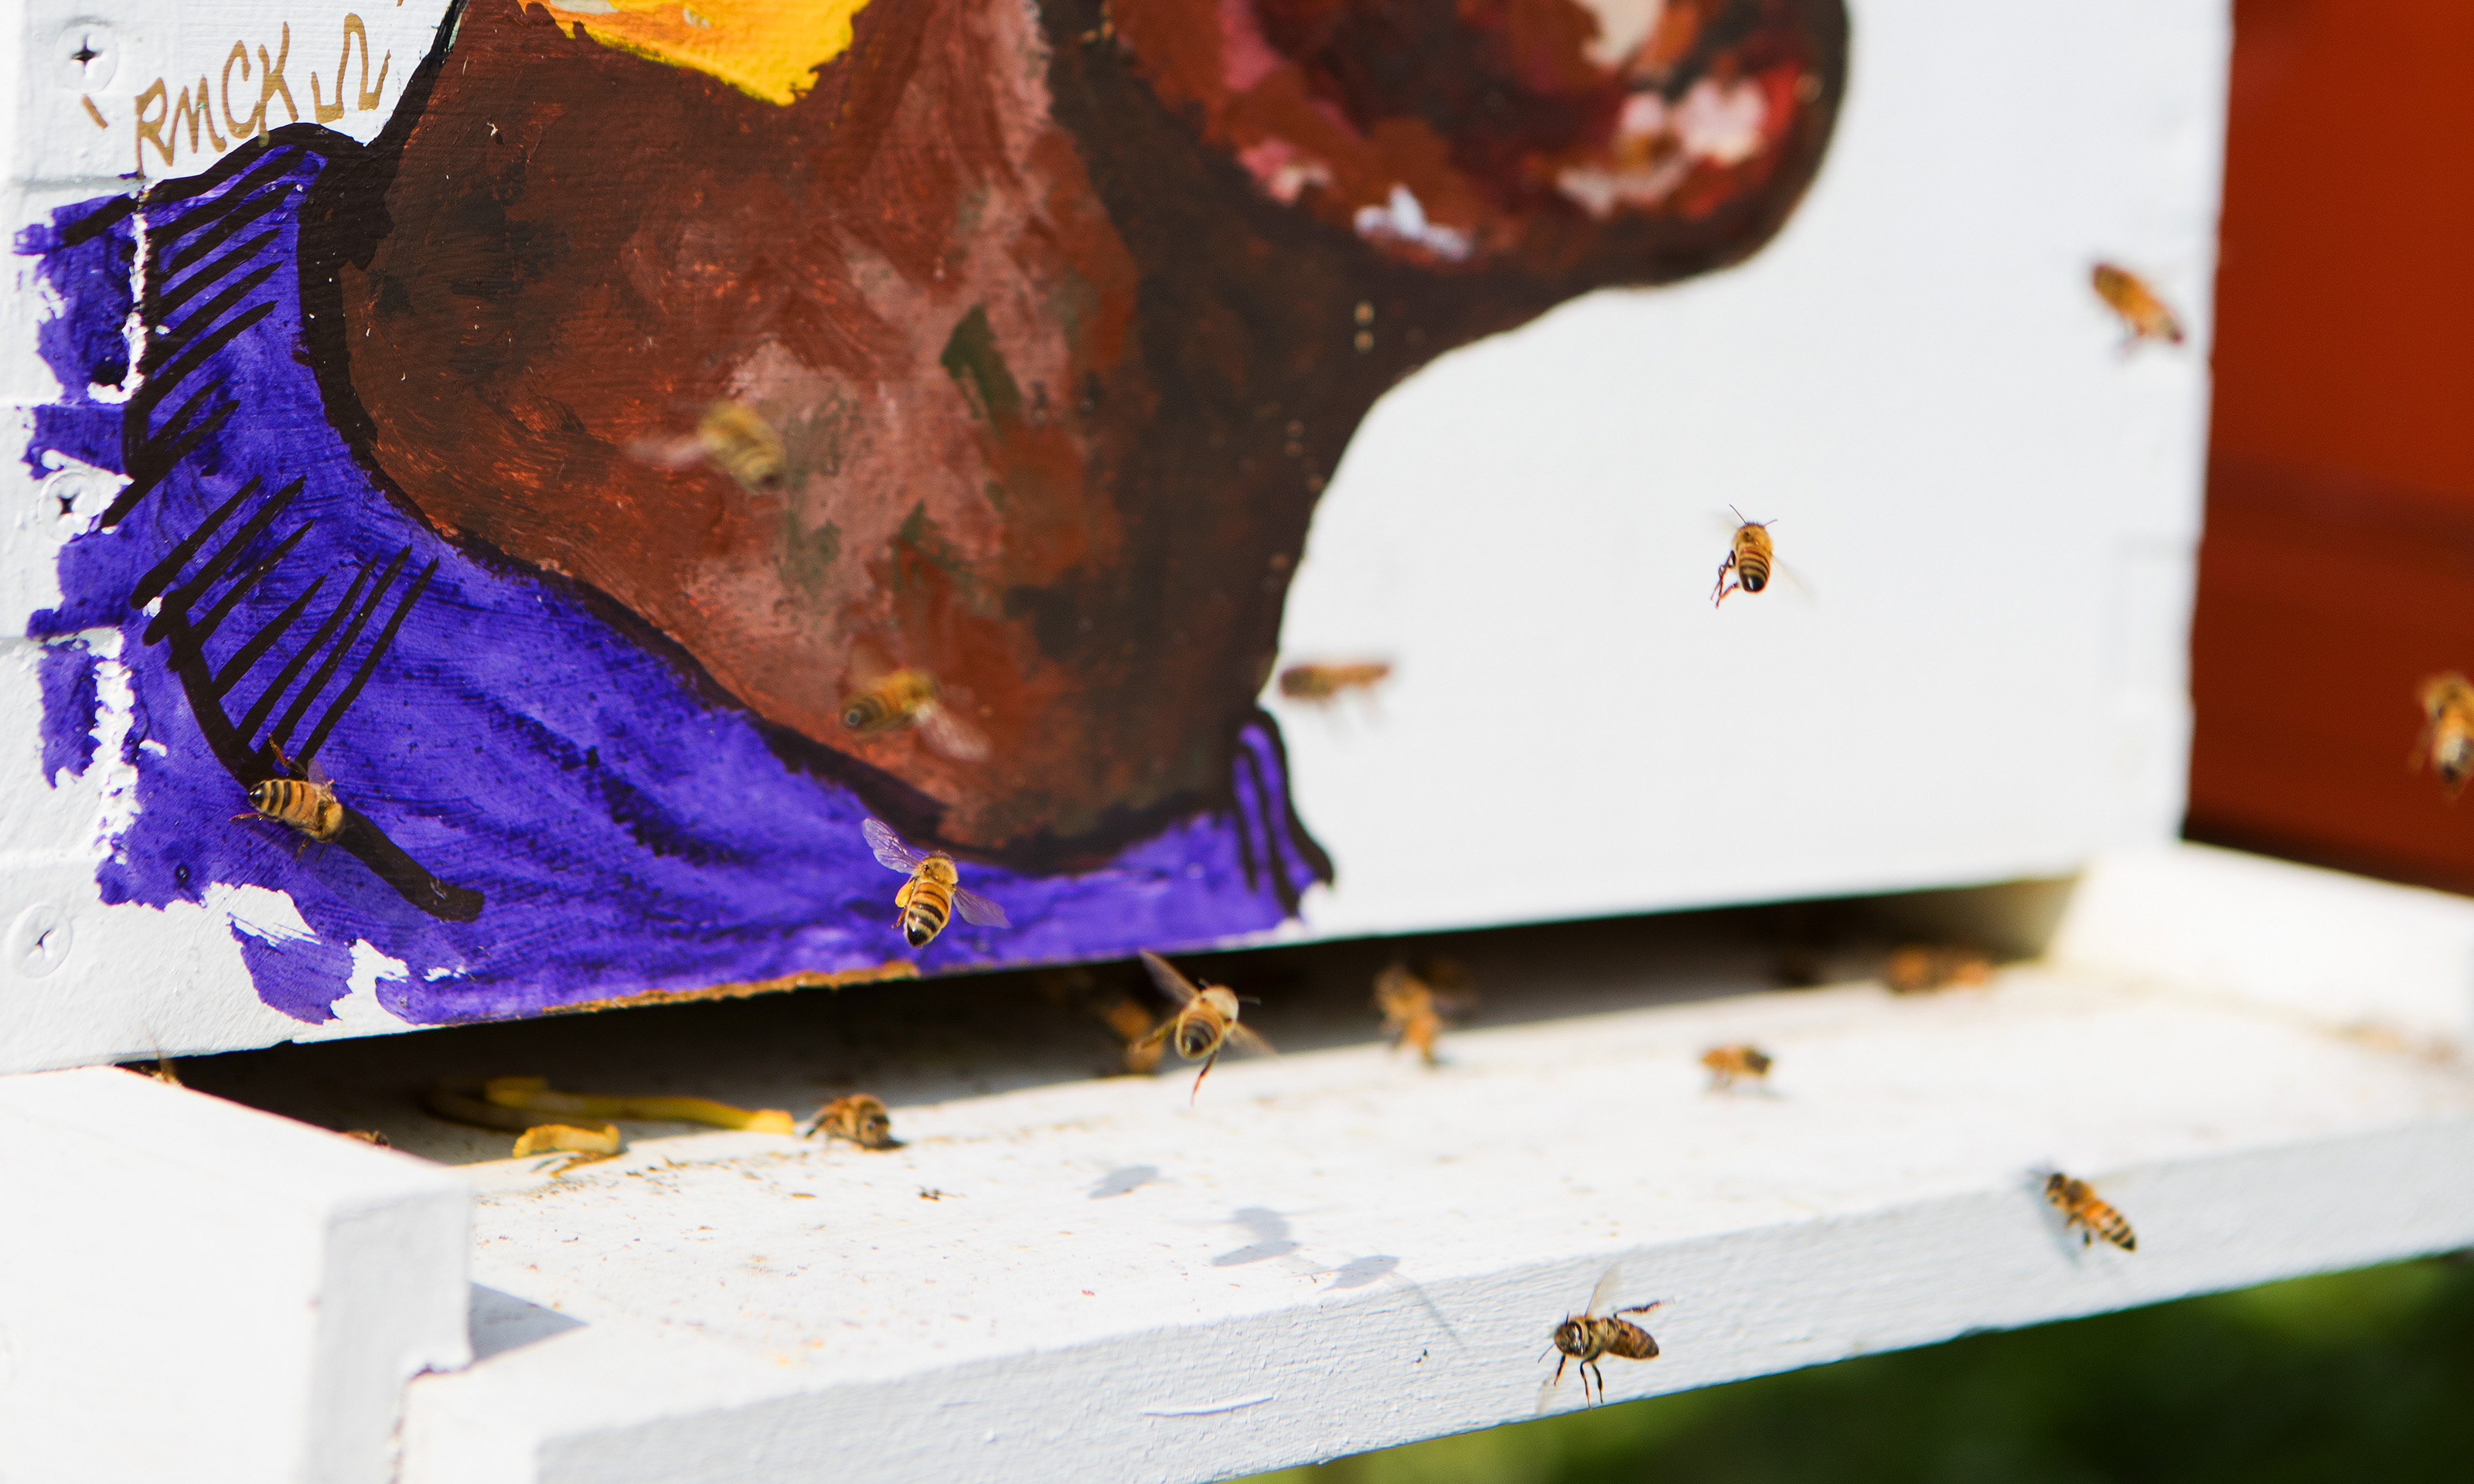 A painting of a man on a beehive